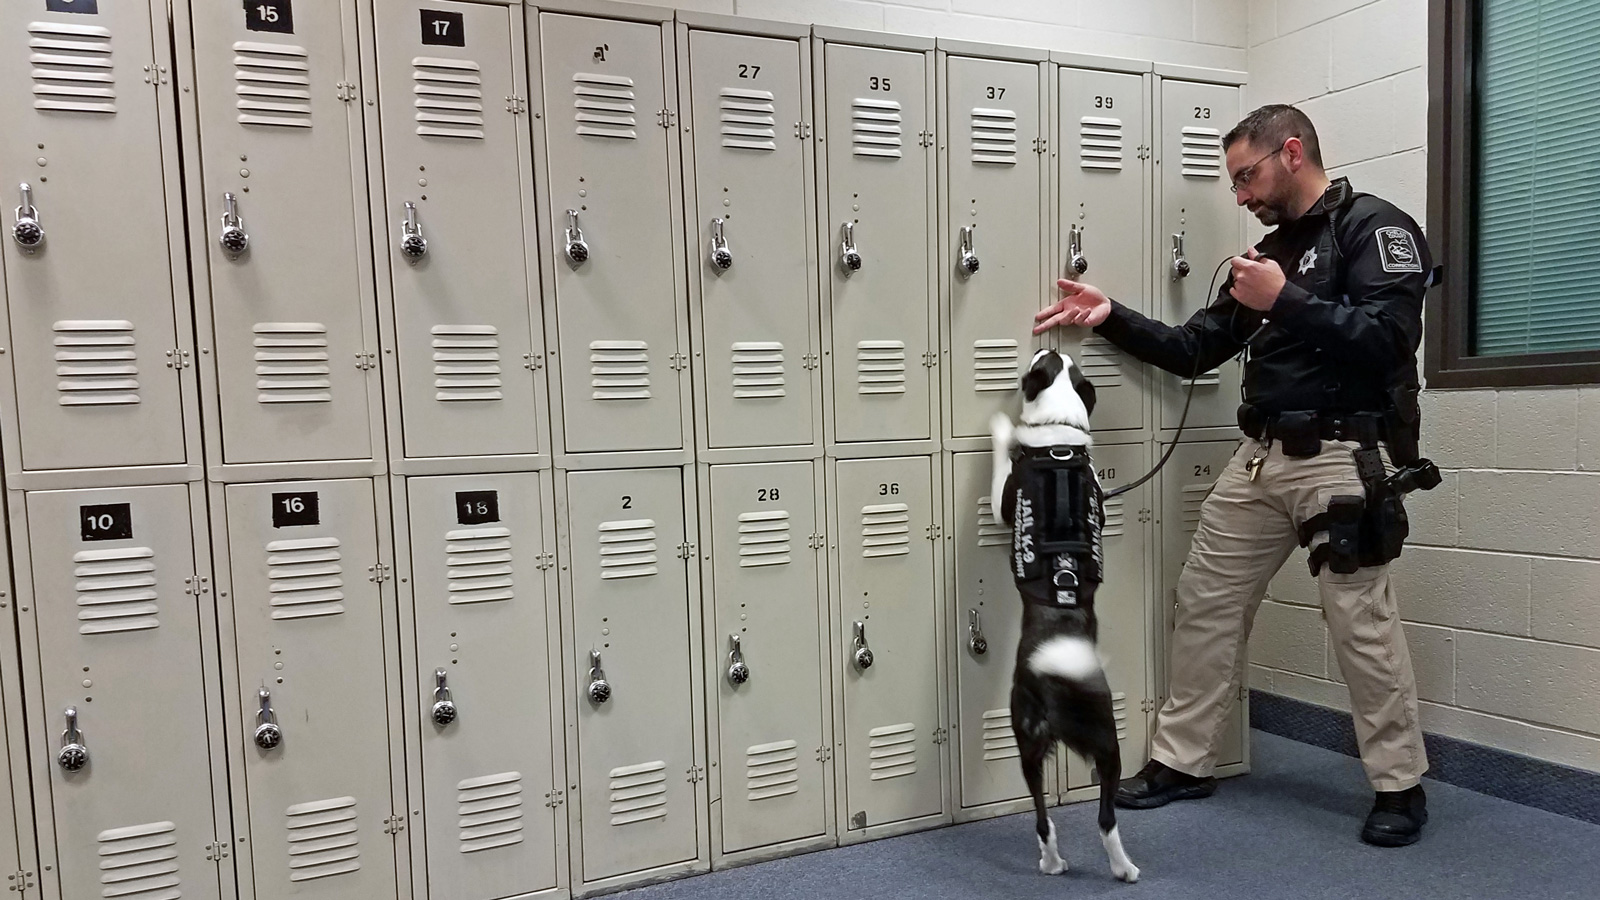 Jail’s narcotics dog to be utilized in some local schools